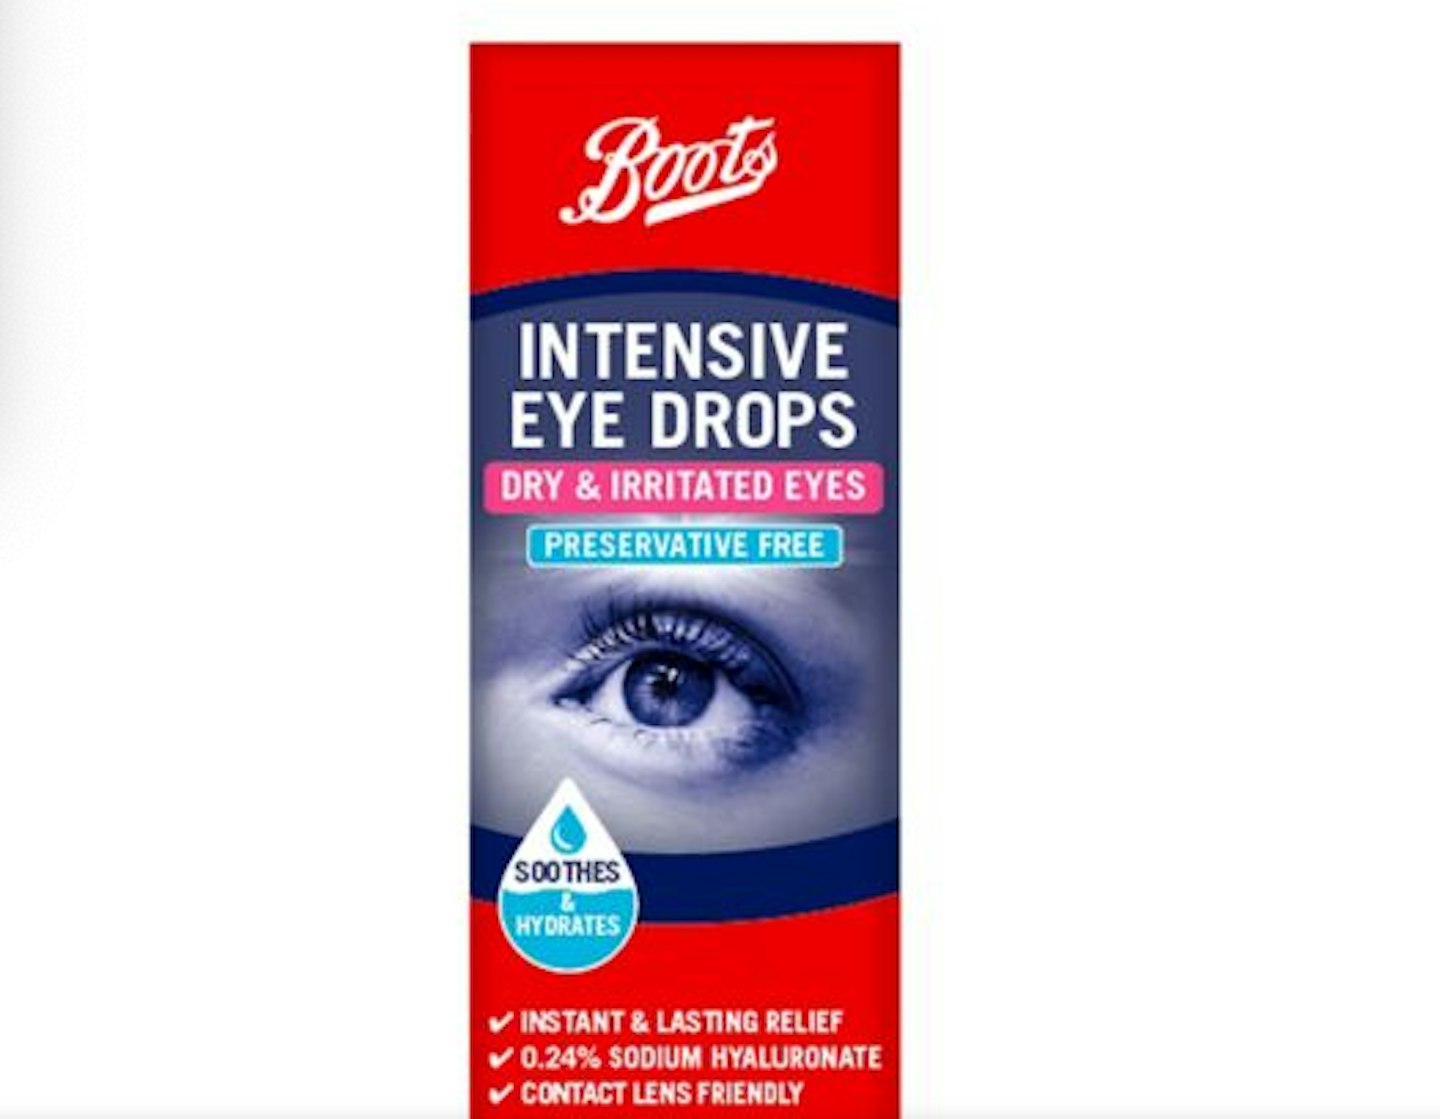 Boots Intensive Eye Drops Dry & Irritated Eyes Preservative Free, £8.99